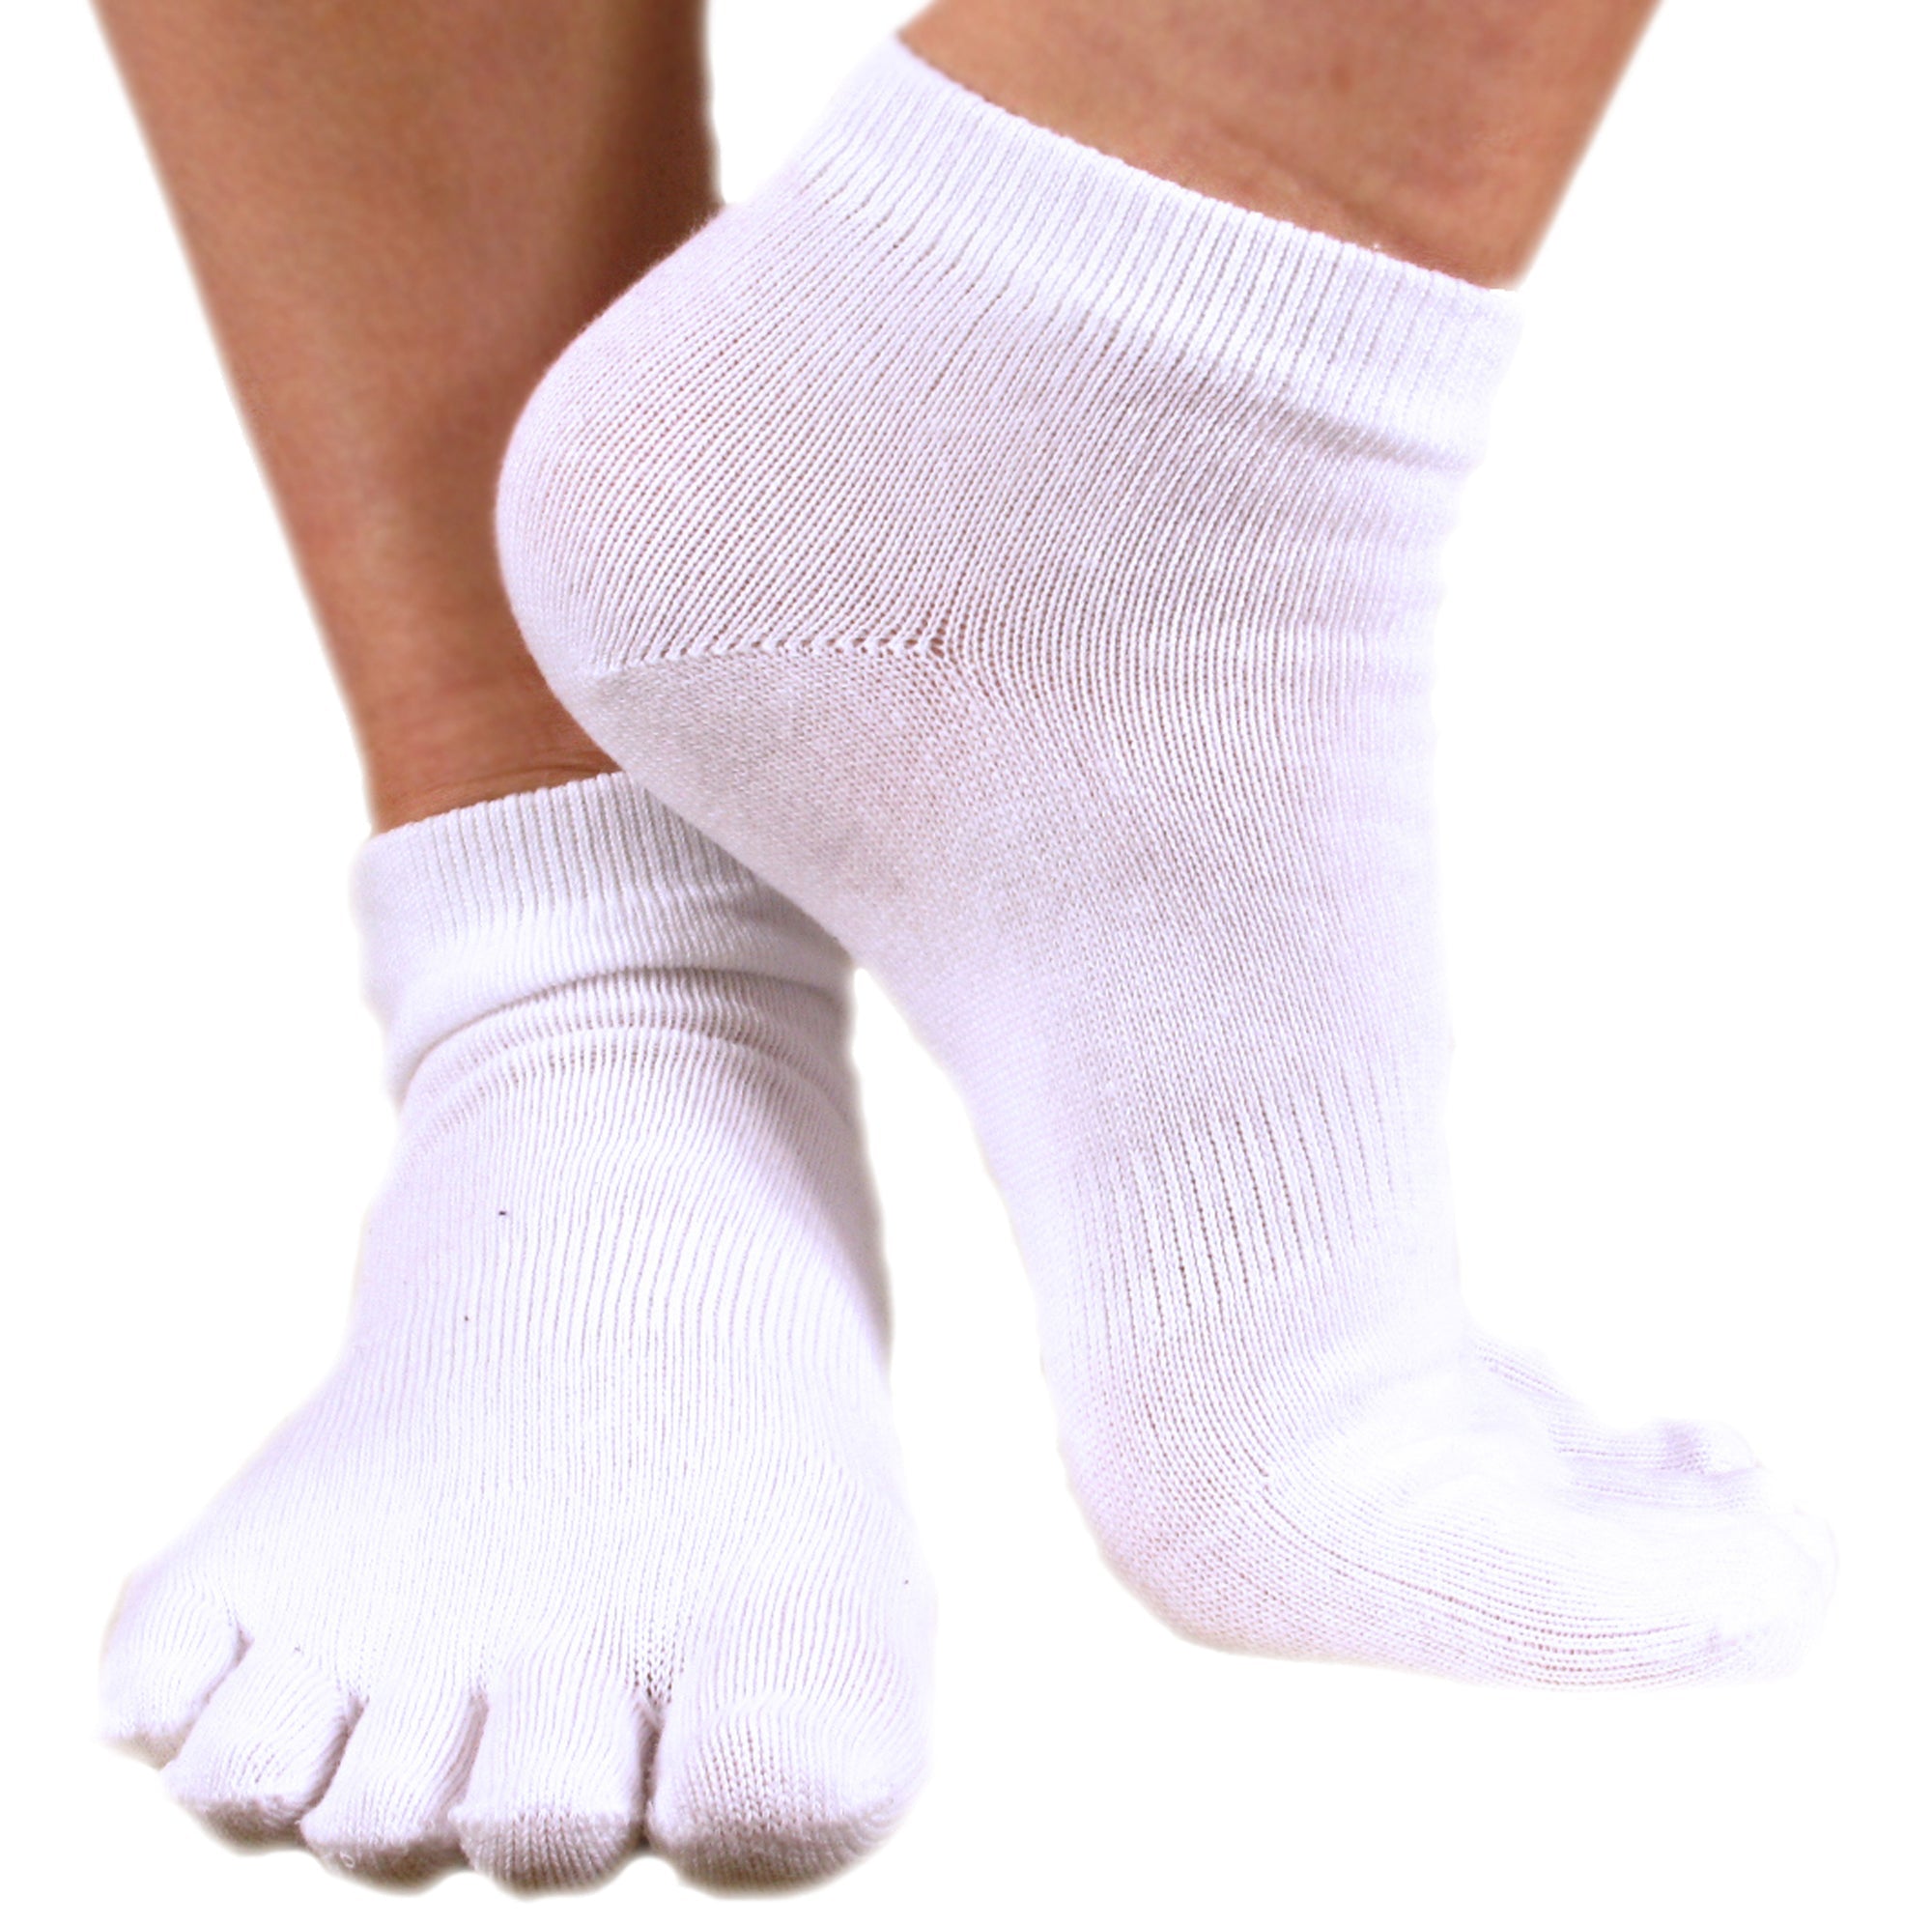 Toe Yoga Socks for Sports, Costumes or Everyday Wear